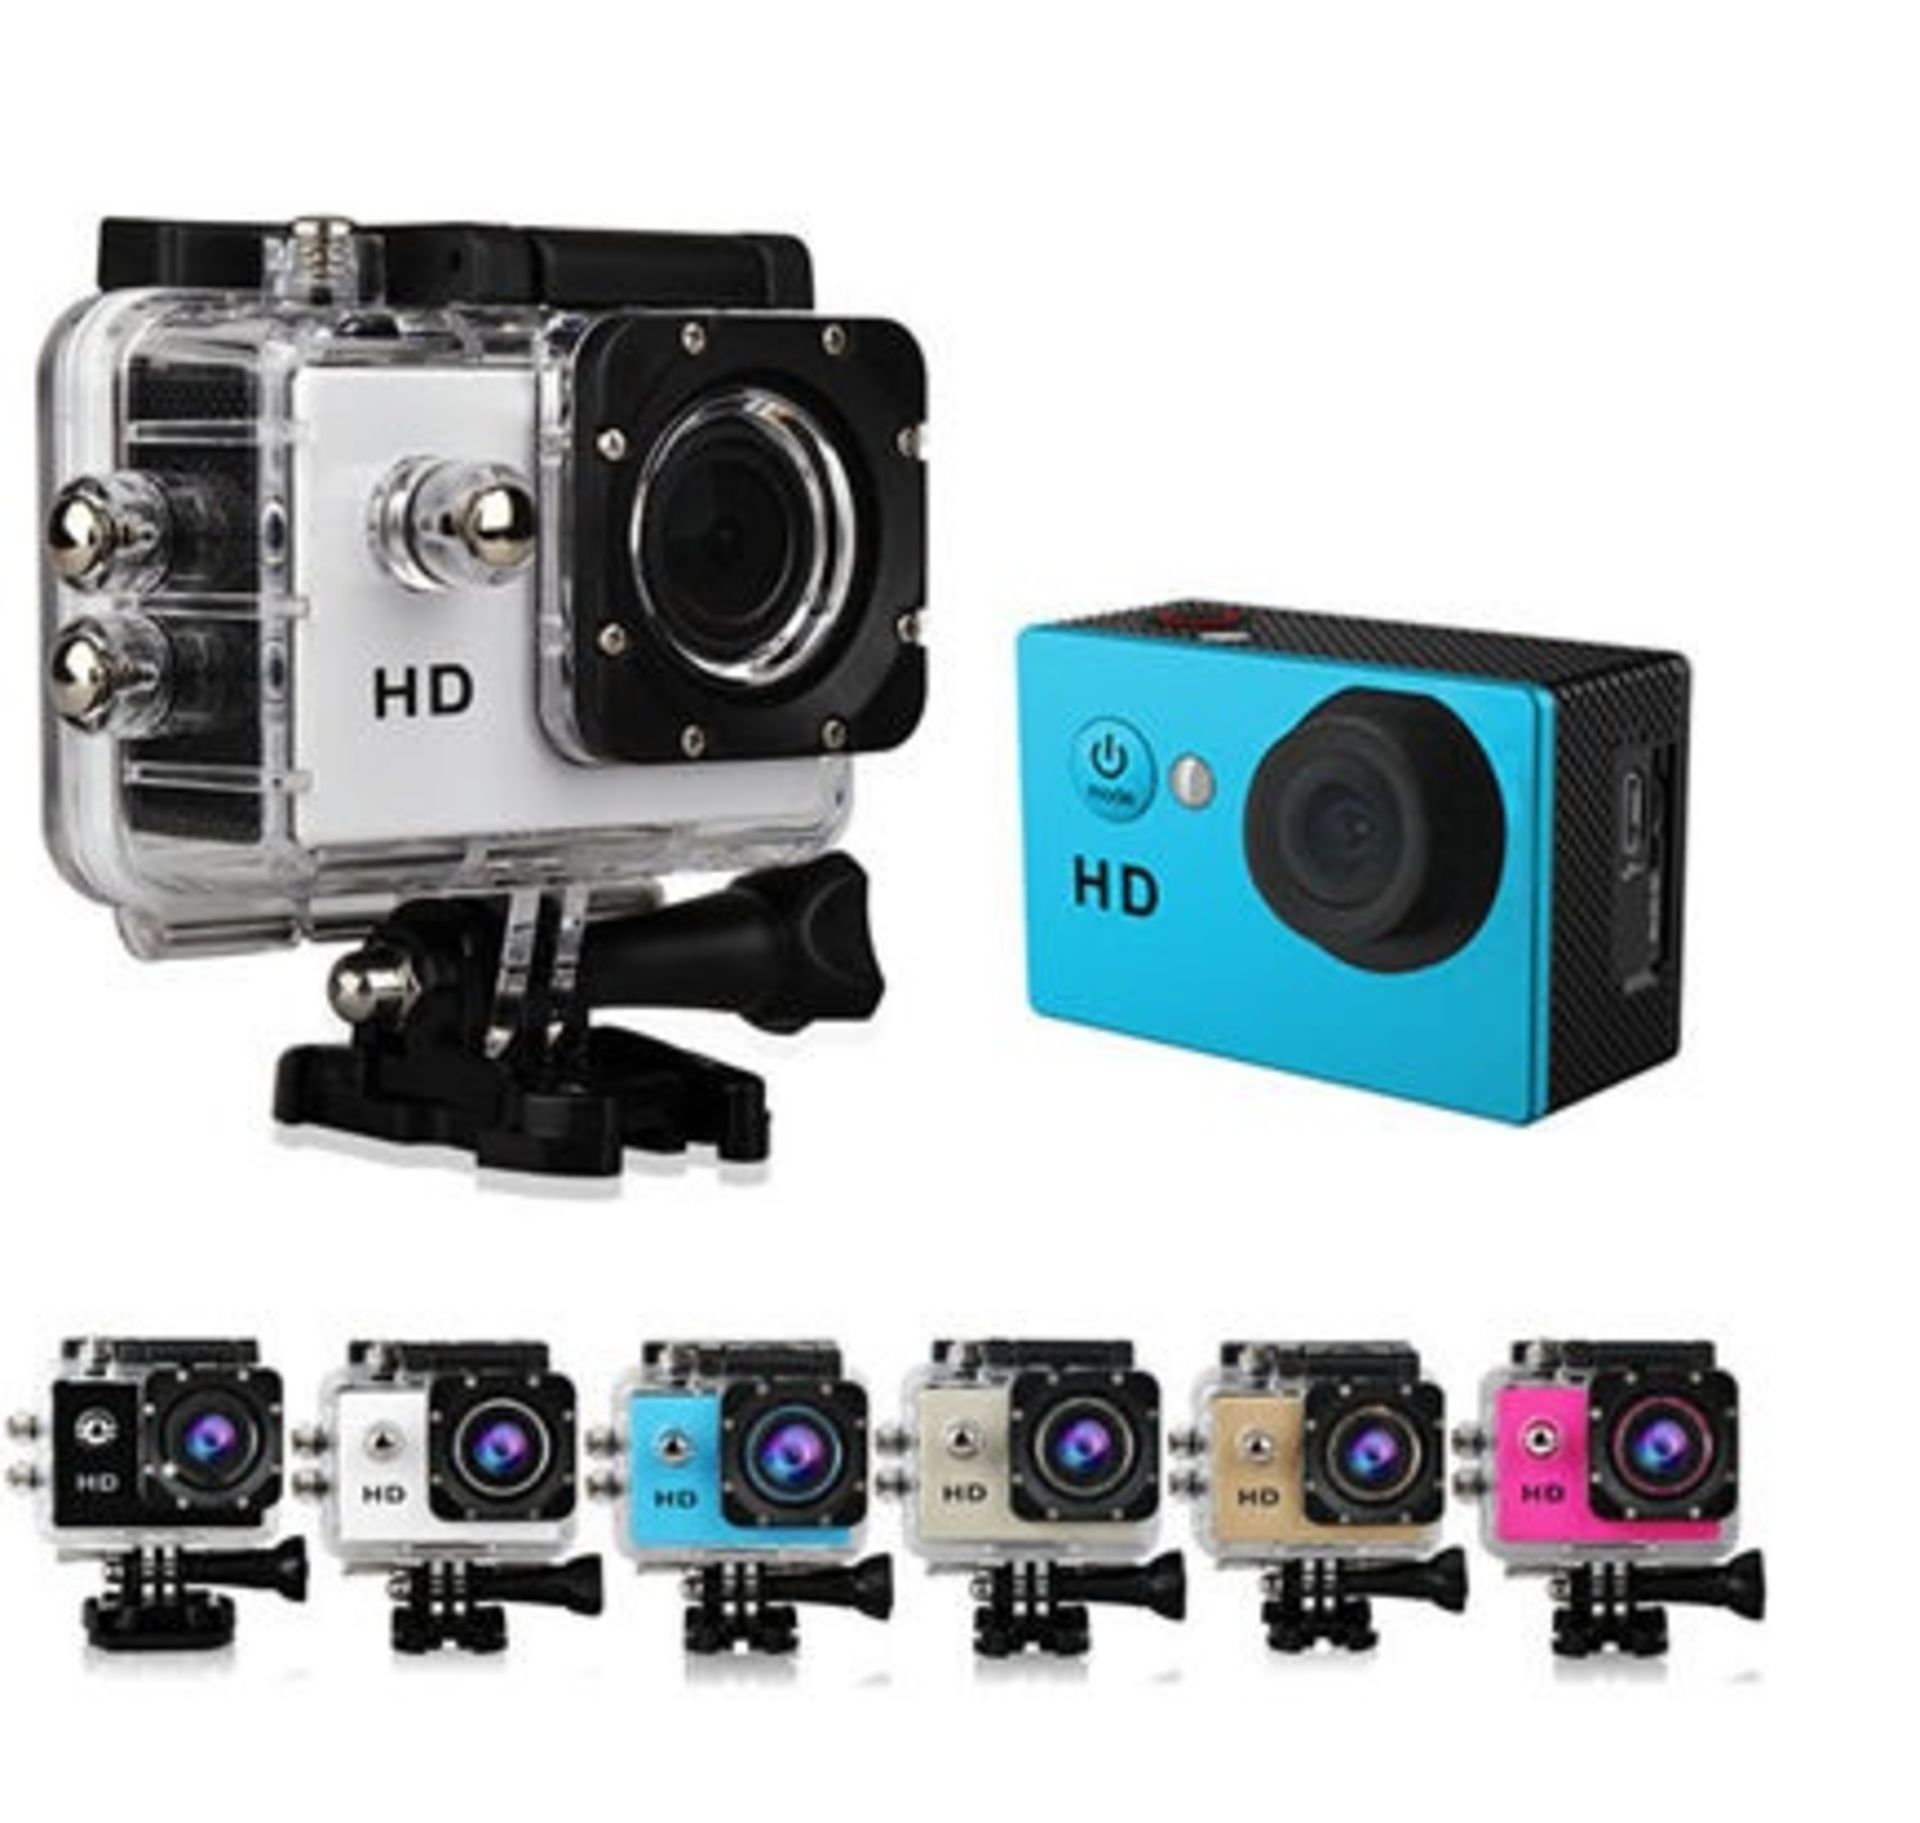 Brand New Full HD Waterproof Action Camera With Box And Accessories - 30m Waterproof - Mounts &